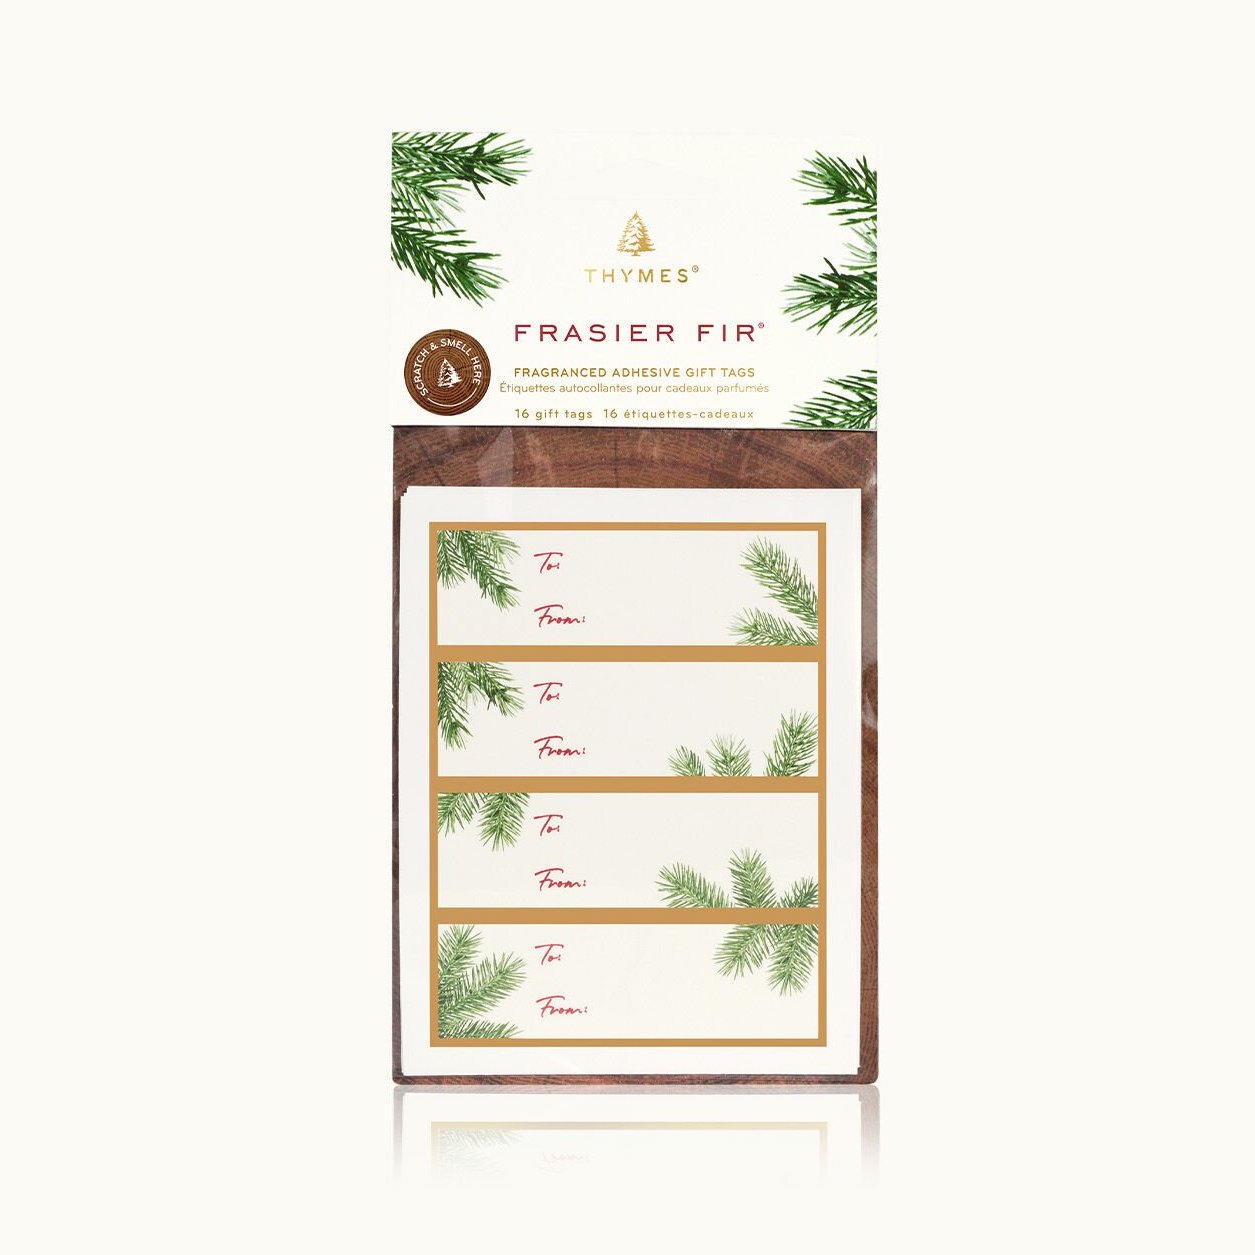 Thymes | Frasier Fir Fragranced Adhesive Gift Tags | 16 Tags